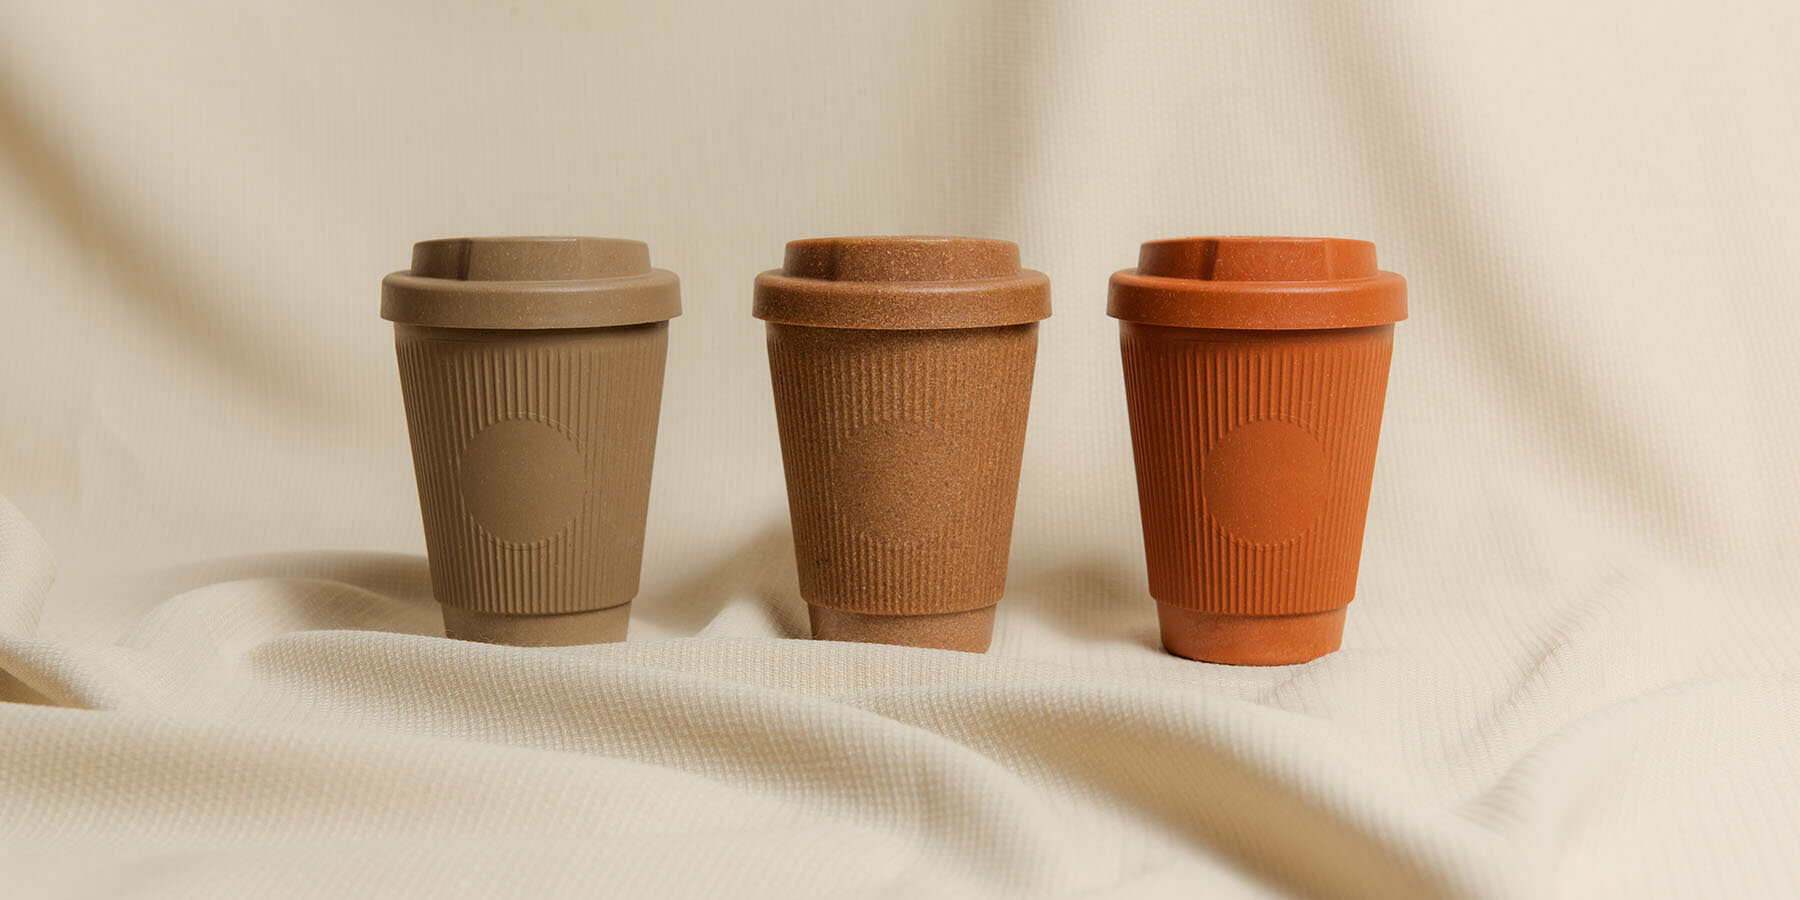 https://static.designboom.com/wp-content/uploads/2022/05/kaffeeform-launches-two-new-version-of-its-popular-travel-mug-weducer-cup-made-from-repurposed-waste-materials-2-627a5f7813c94.jpg